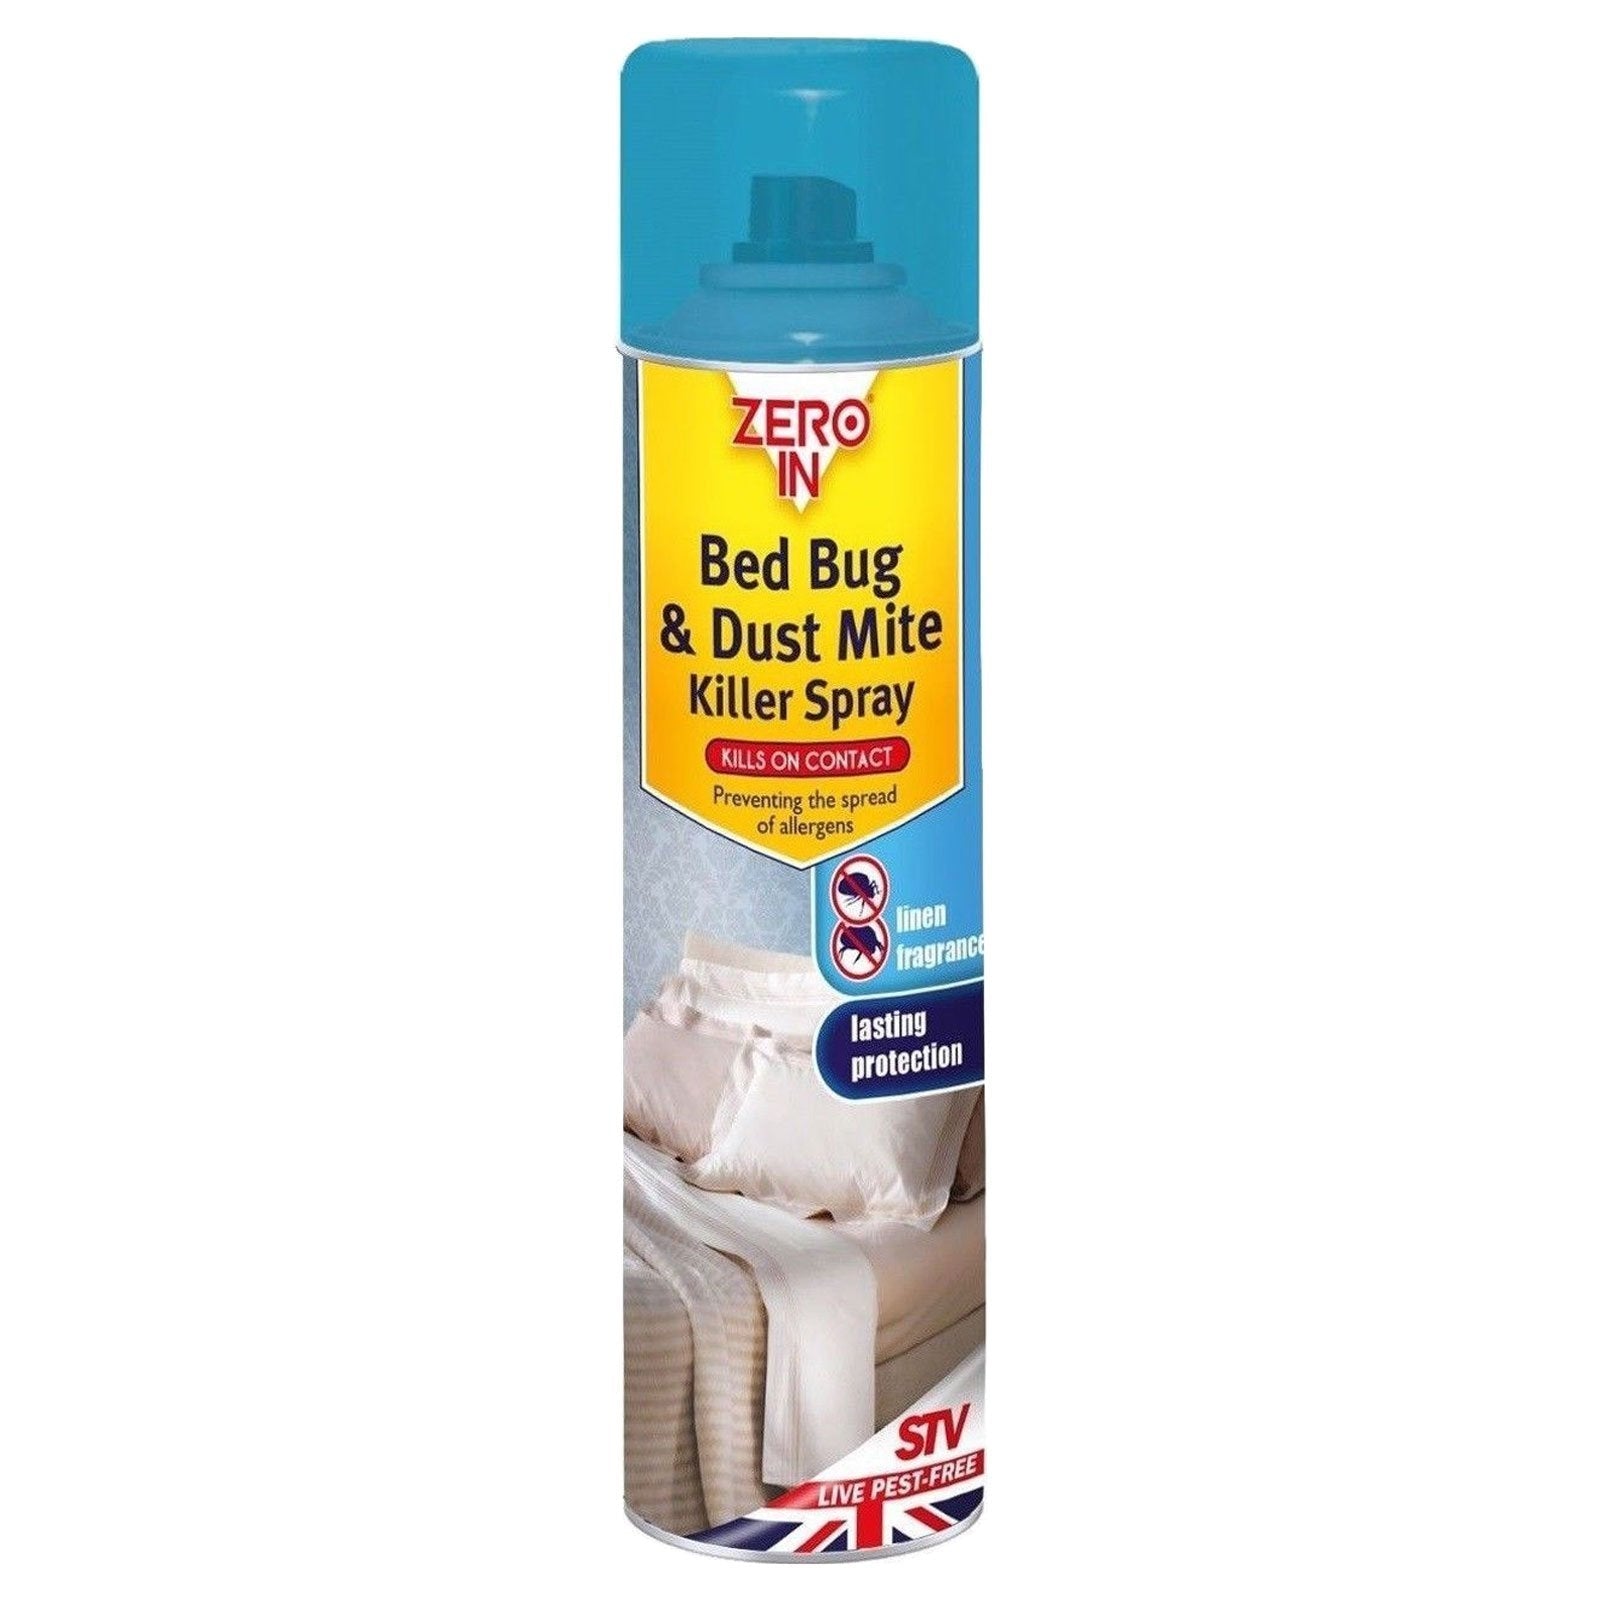 Zero In Bed Bug & Dust Mite Killer Spray 300ml - NWT FM SOLUTIONS - YOUR CATERING WHOLESALER